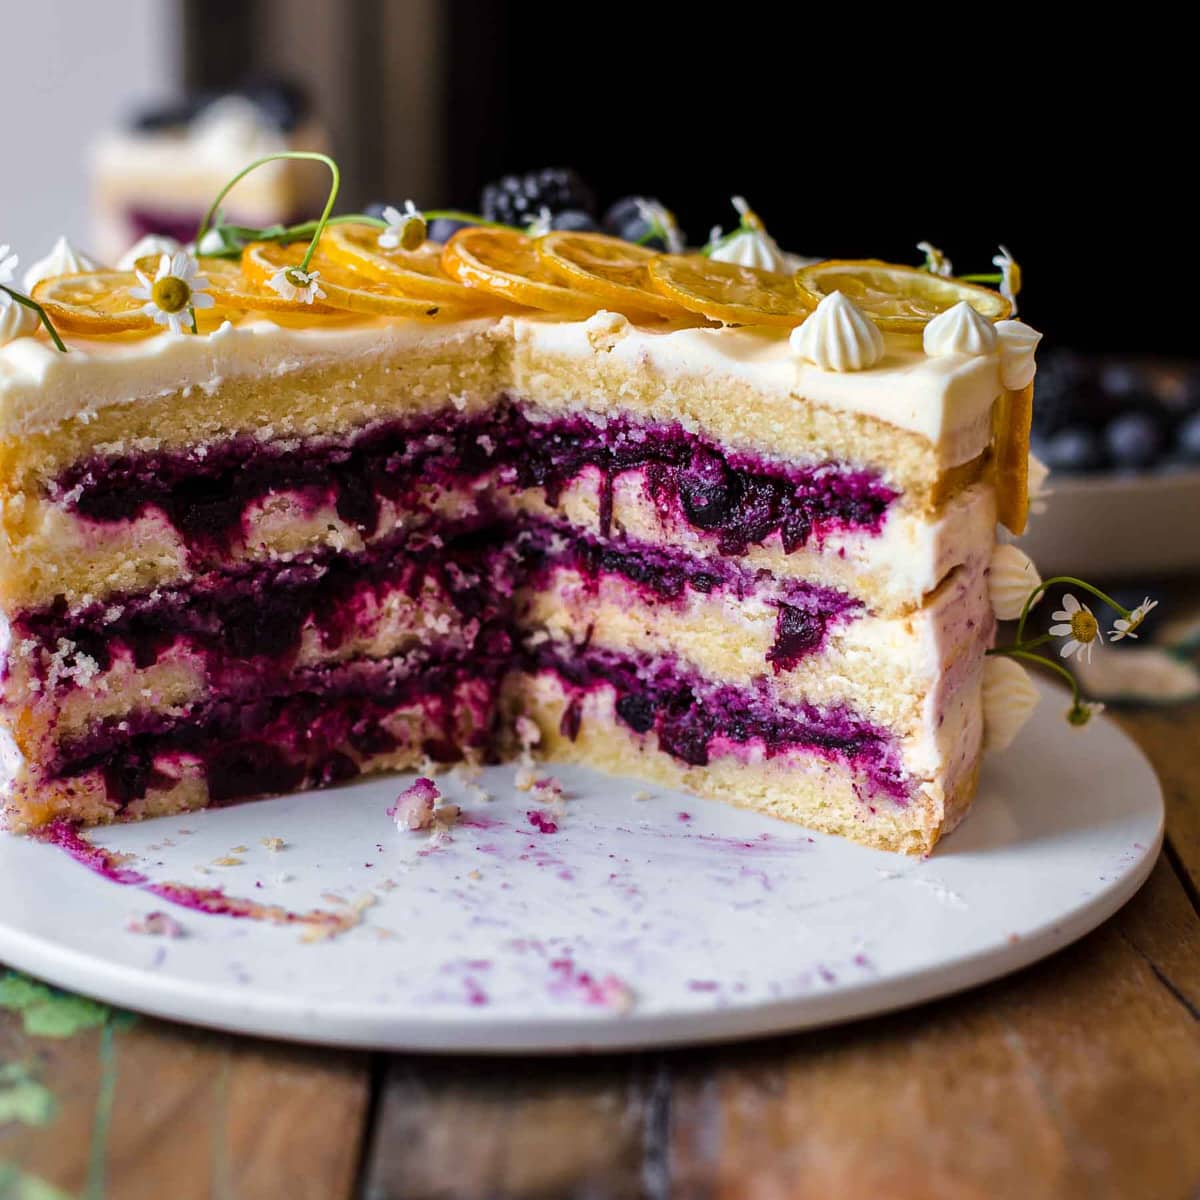 Lemon layer cake with blueberry filling cut open on a white serving plate